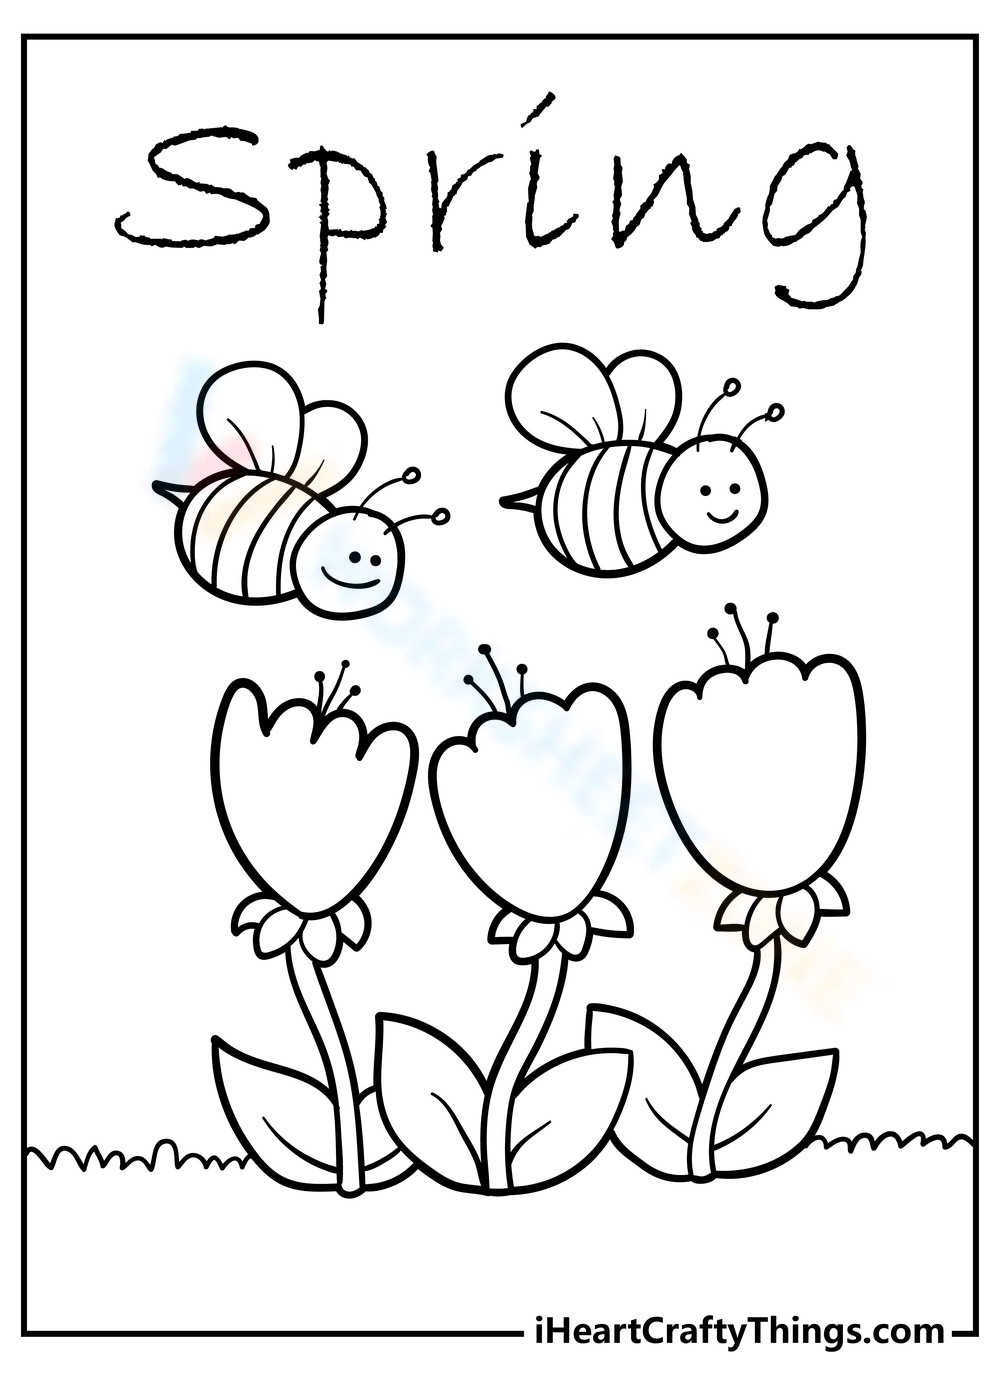 Bee and flowers